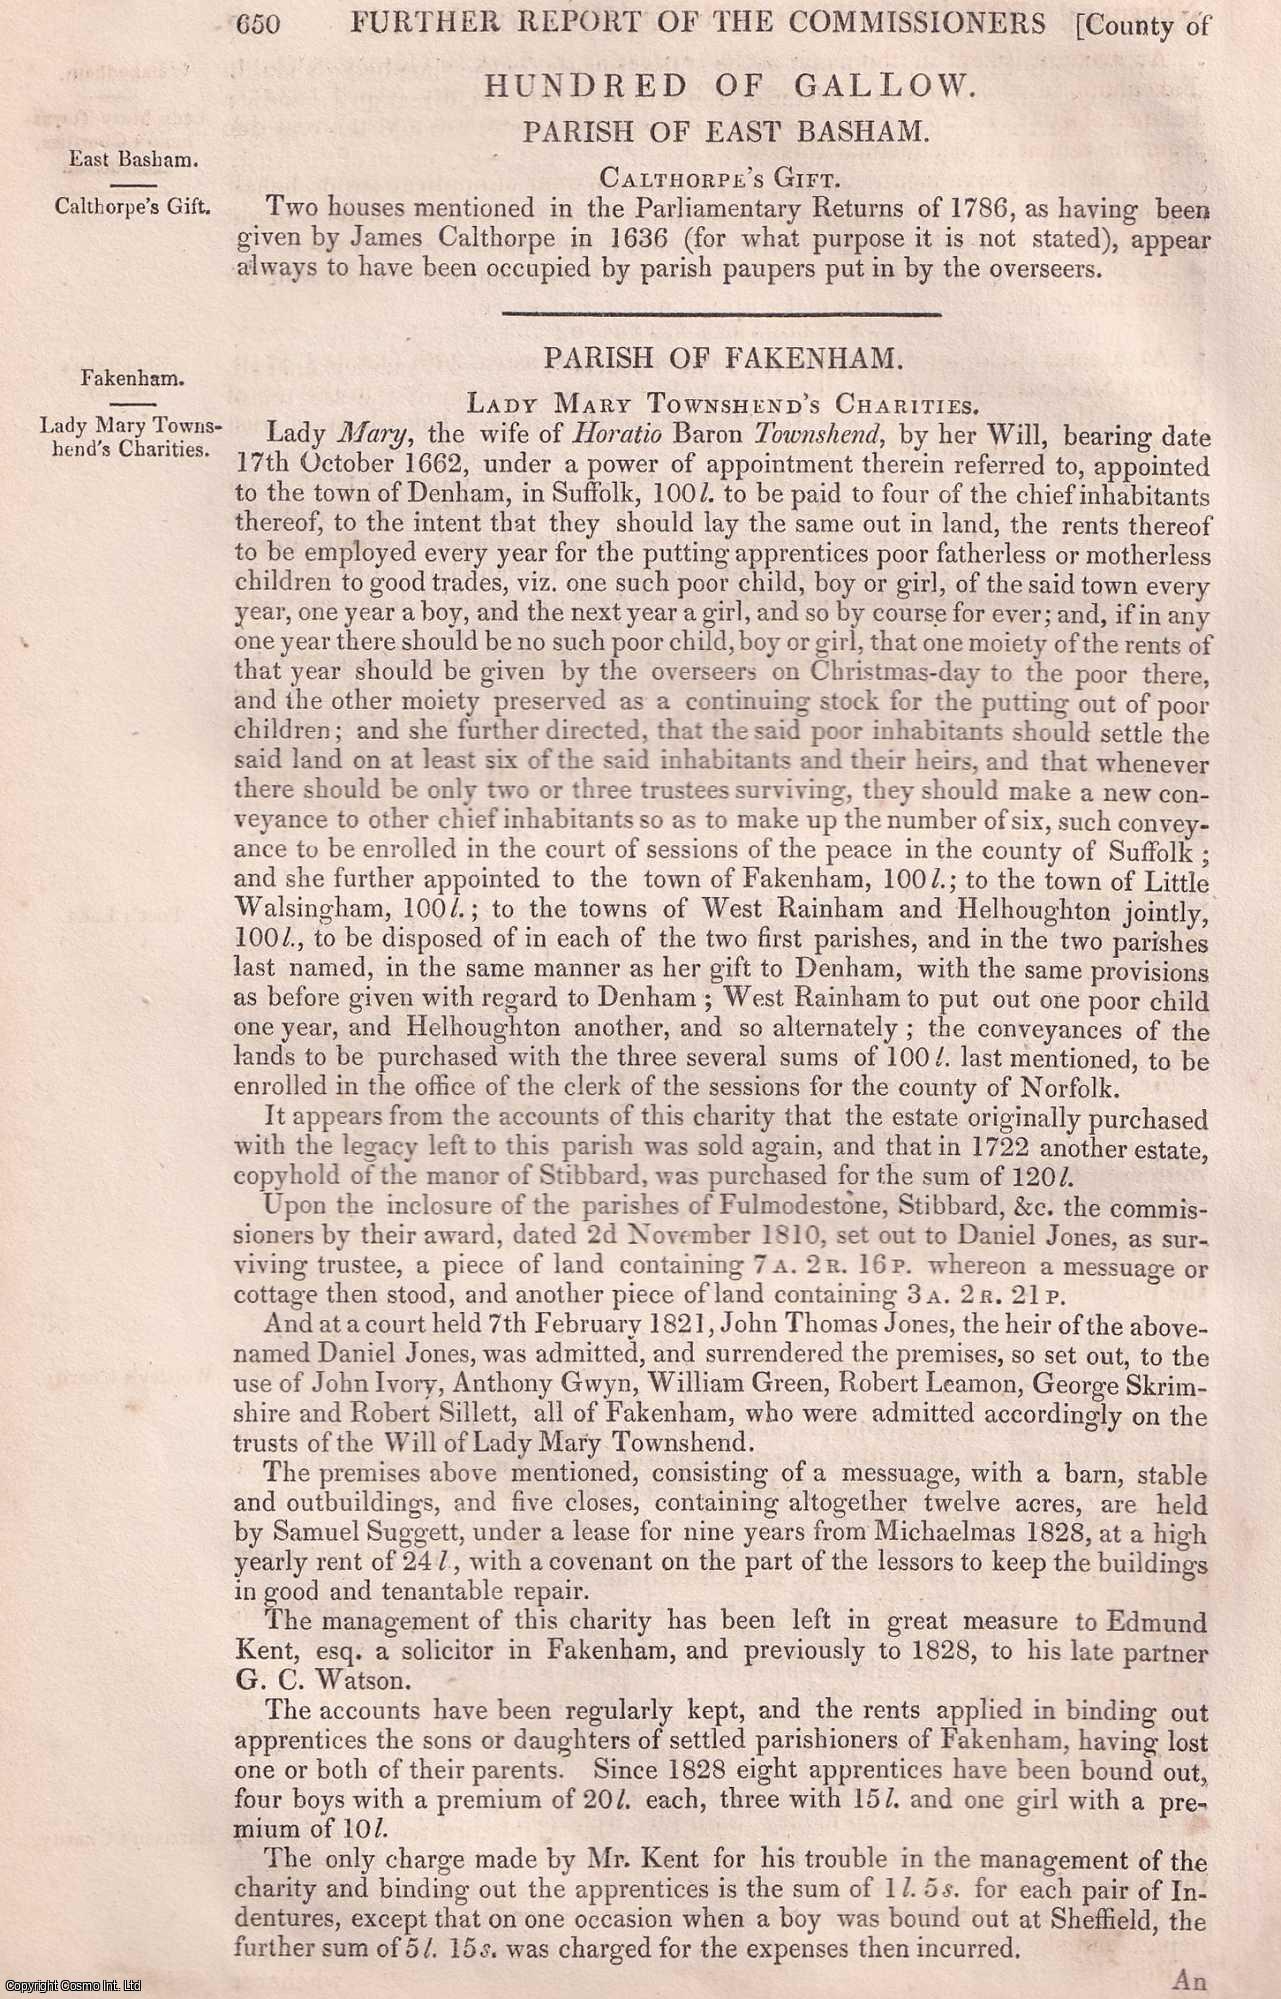 Charity Commissioners - 1835. Parish of Fakenham, Fulmodeston, Kettlestone, Holkham, and others, Norfolk : An original article from the Reports of the Commissioners to Inquire Concerning Charities & Education of the Poor in England and Wales.